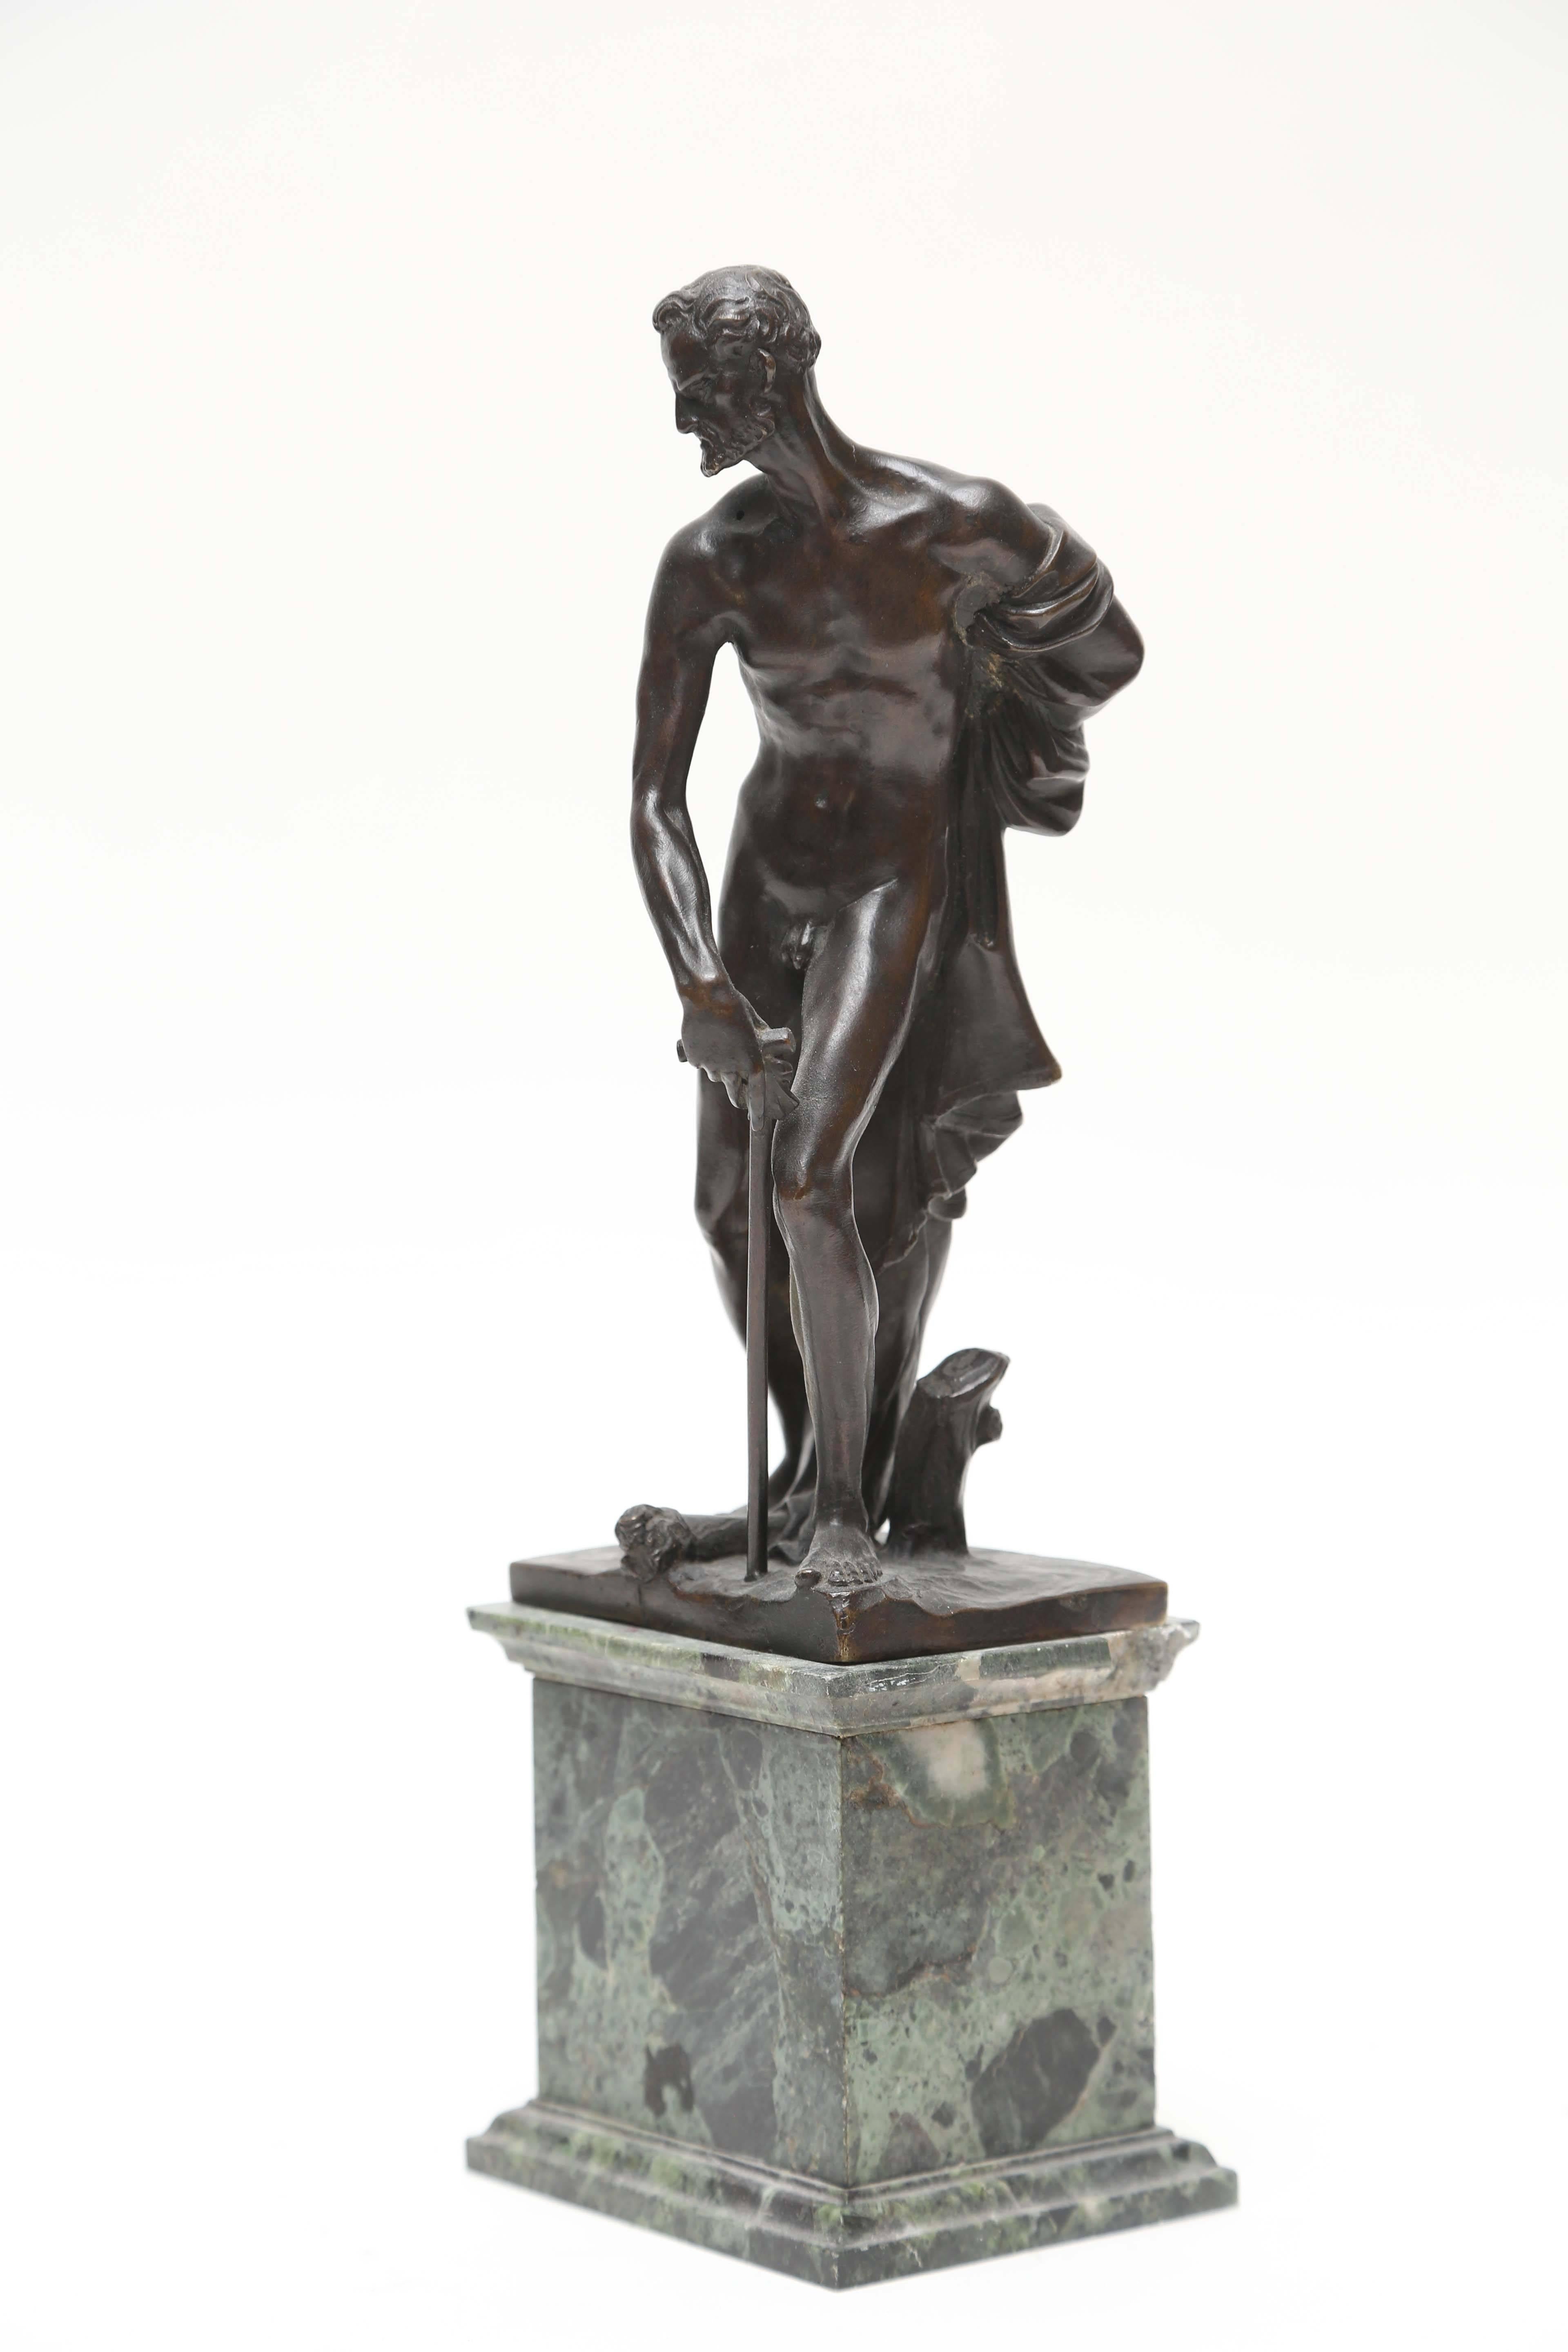 Bronze statuette of St. Jerome, or St Hieronymous, in the manner of the Venetian sculptor Alessandro Vittorio (1525-1608) by the lost wax technique of bronze casting, which leaves a hollow core. The Viennese art scholar Leo Planiscig had attributed